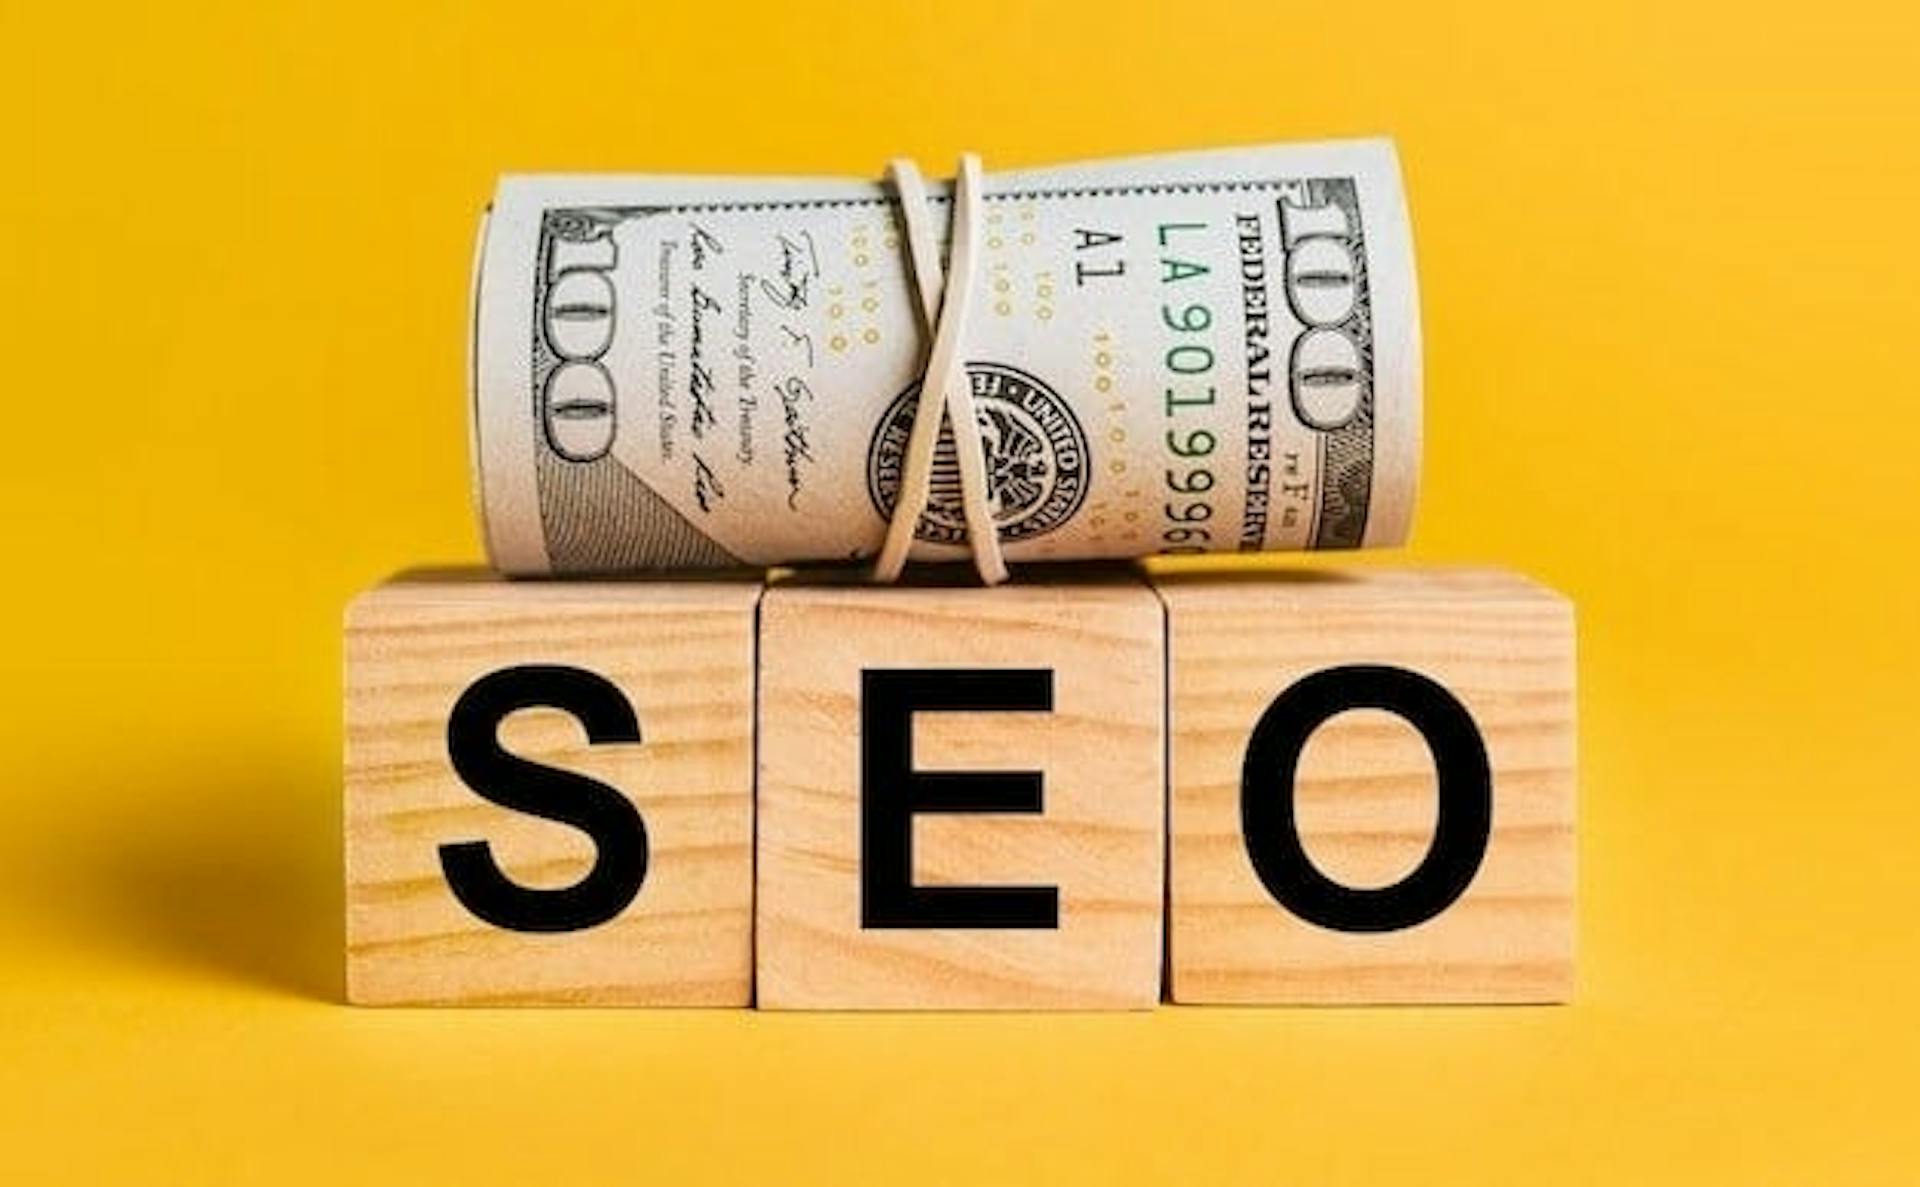 featured image - SEO Services Are Overpriced To The Hilt - Stop Paying Wallet Parasites